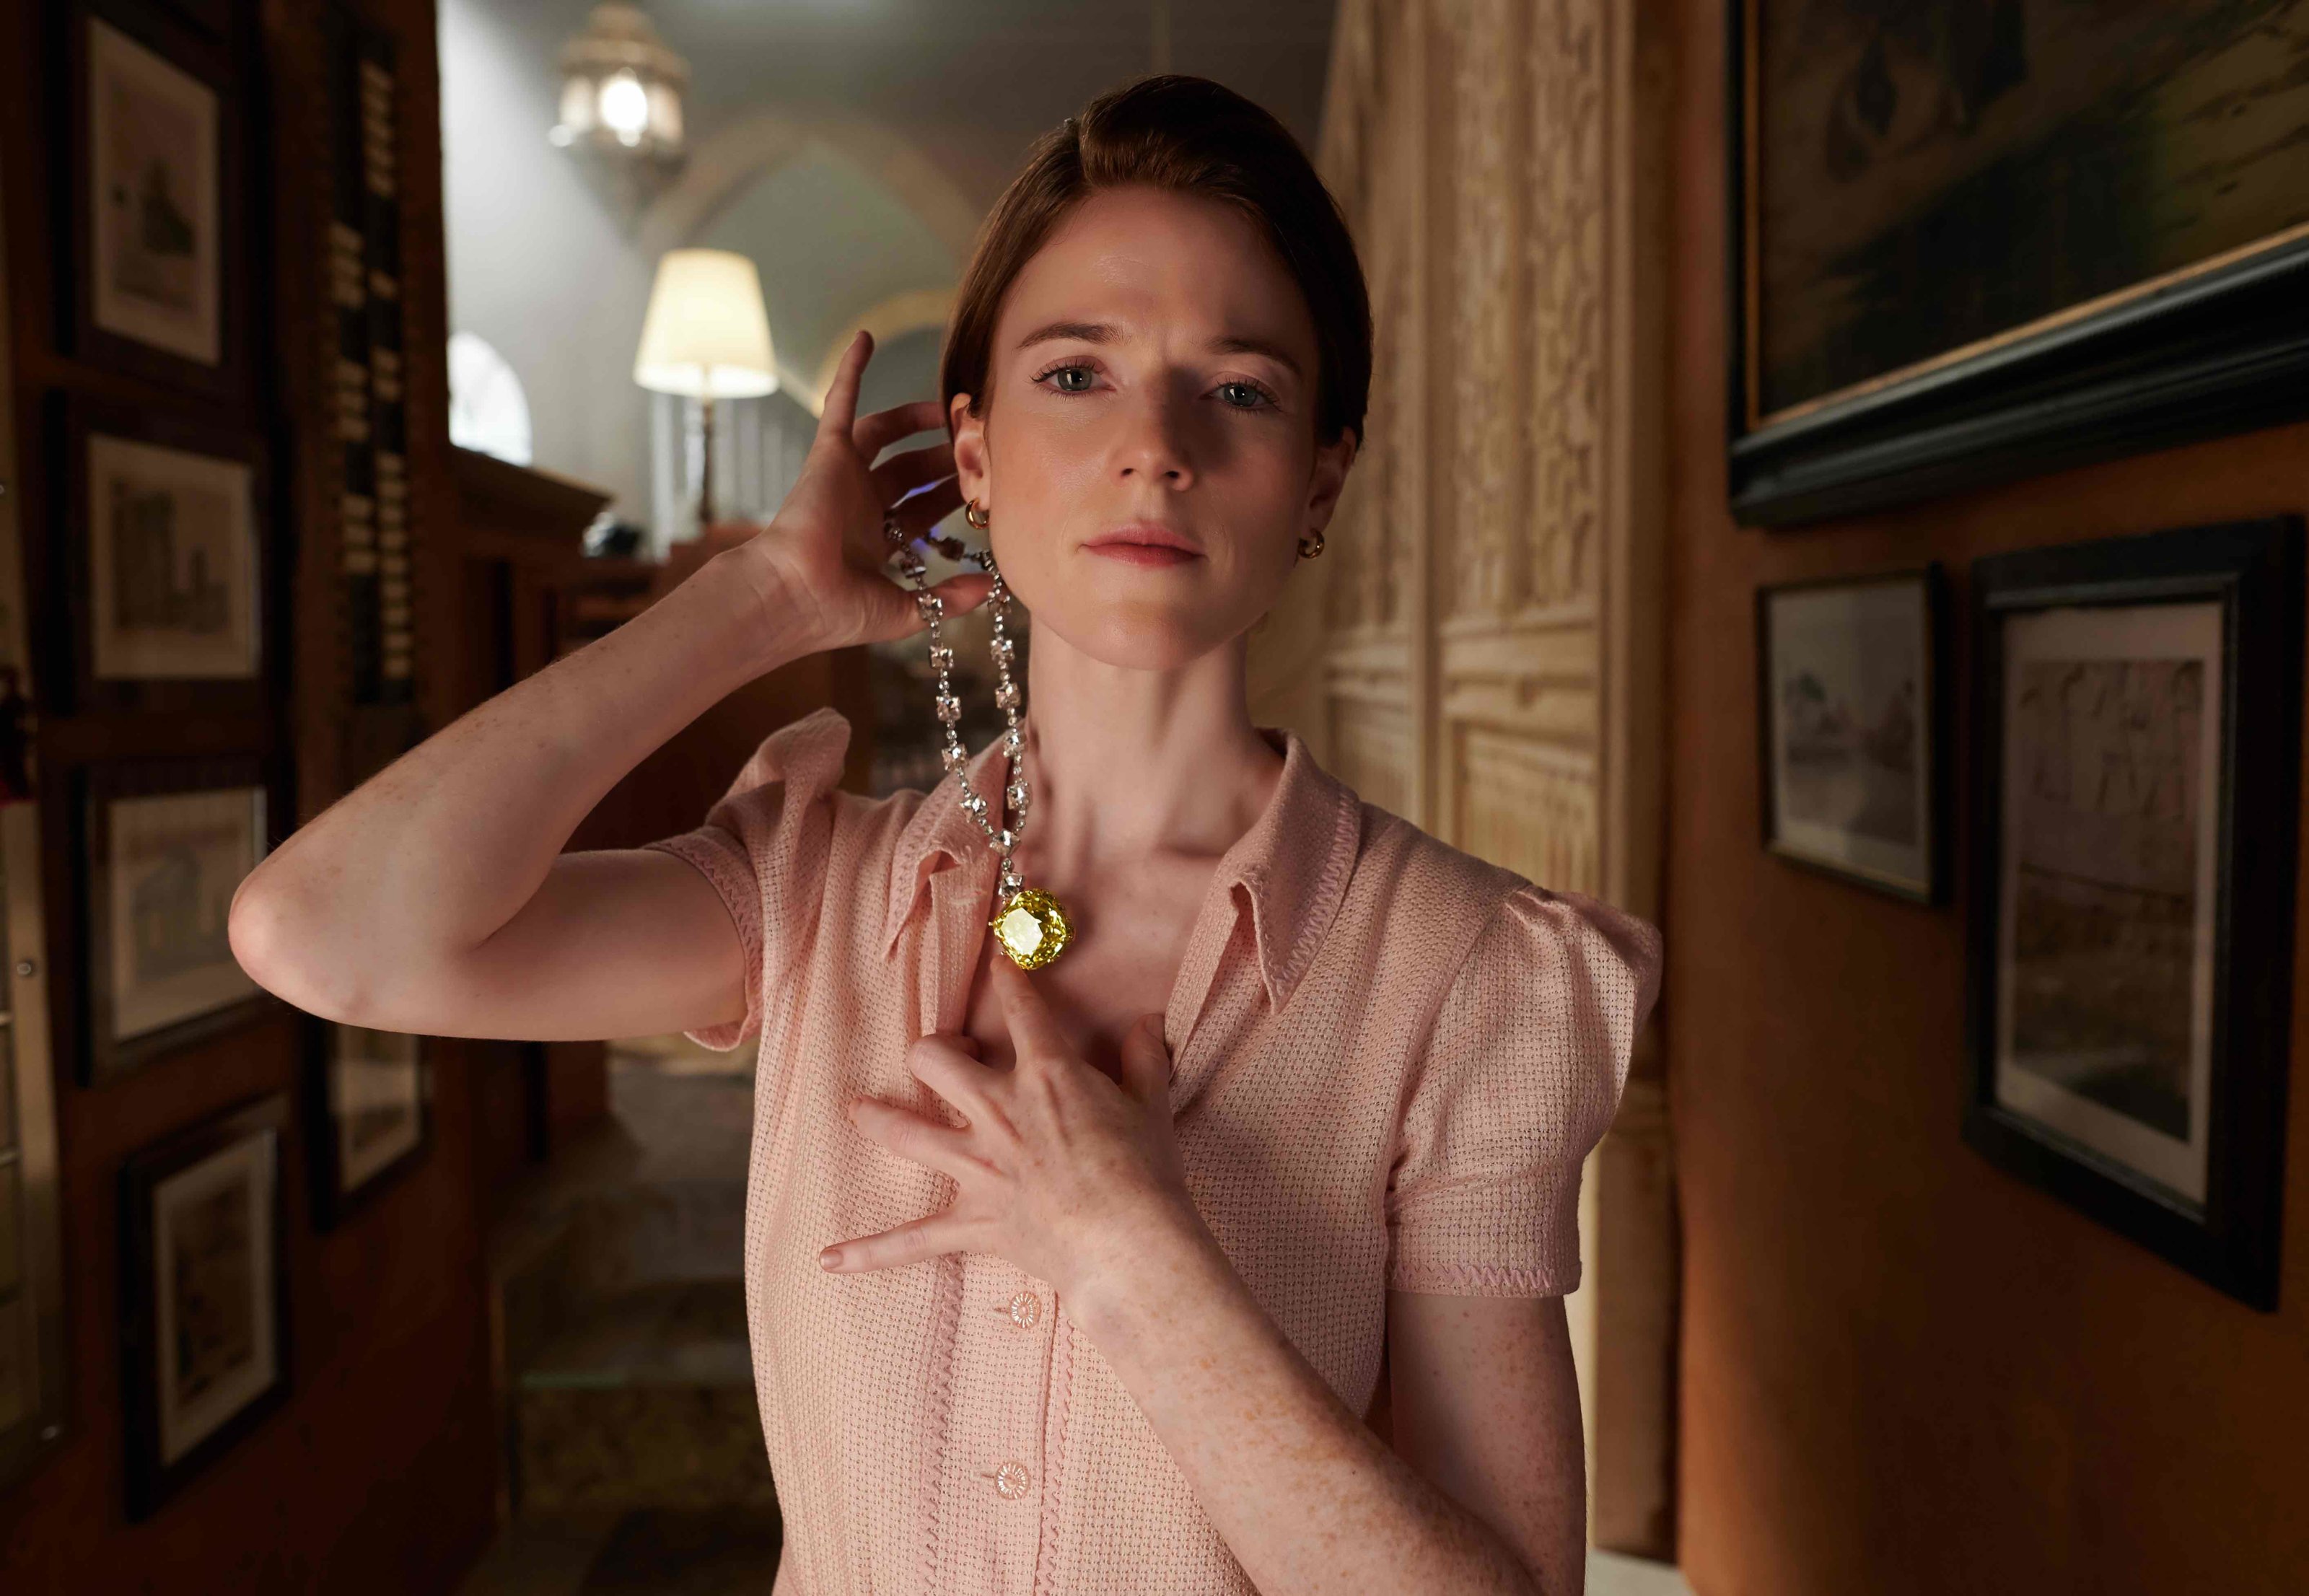 Rose Leslie trying on a diamond necklace with a 128-carat fancy yellow diamond by Tiffany in the Death on The Nile movie